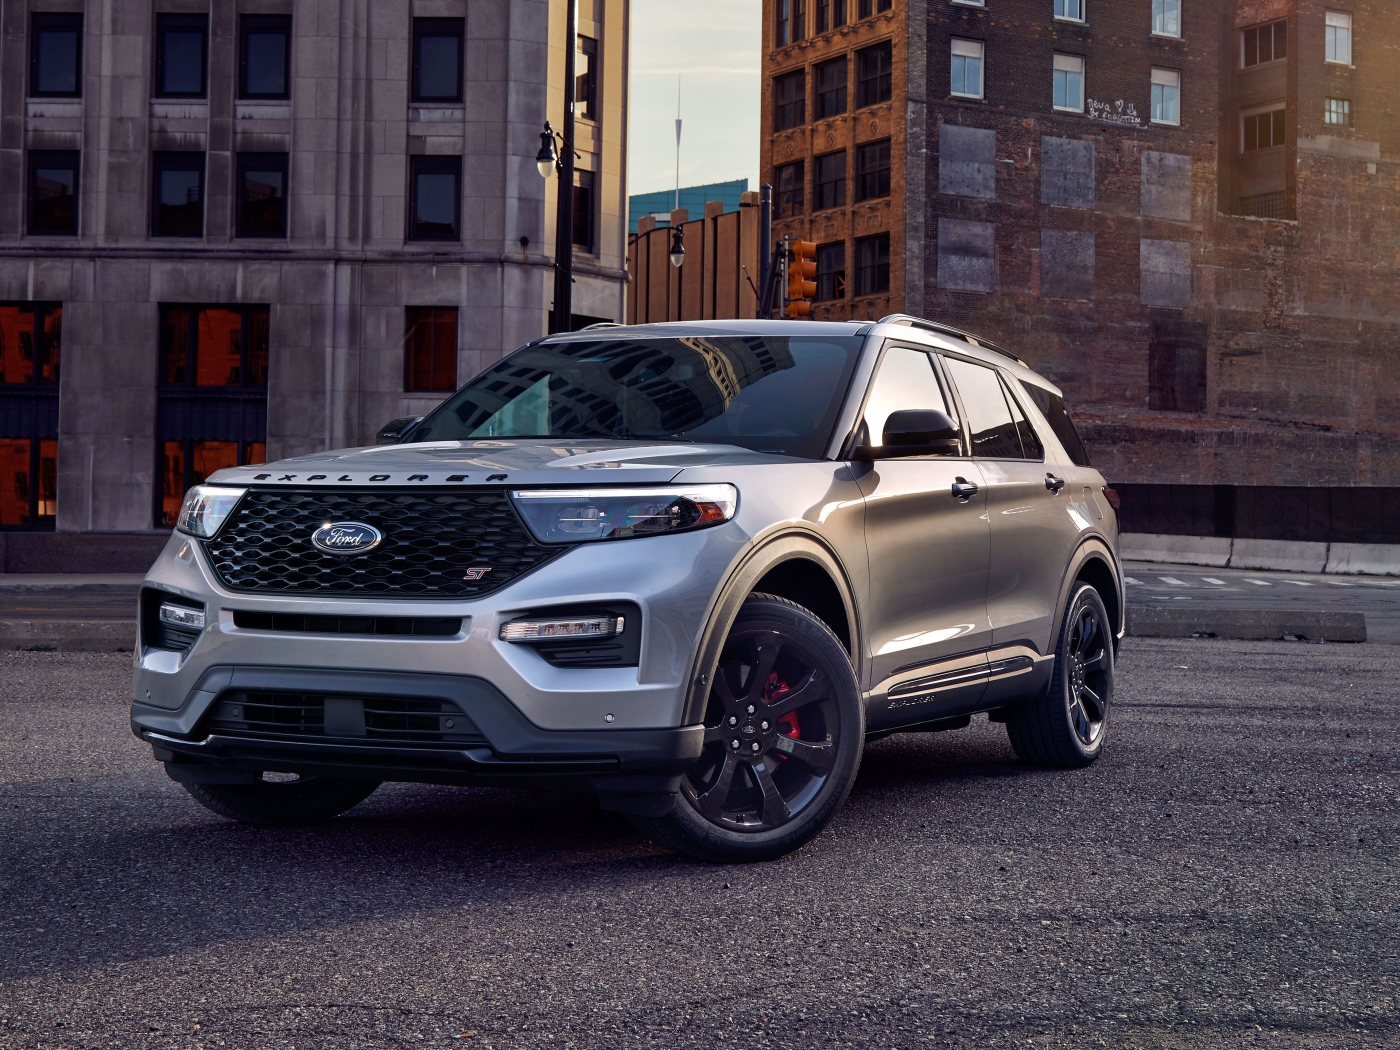 2020 Ford ST ST SUV